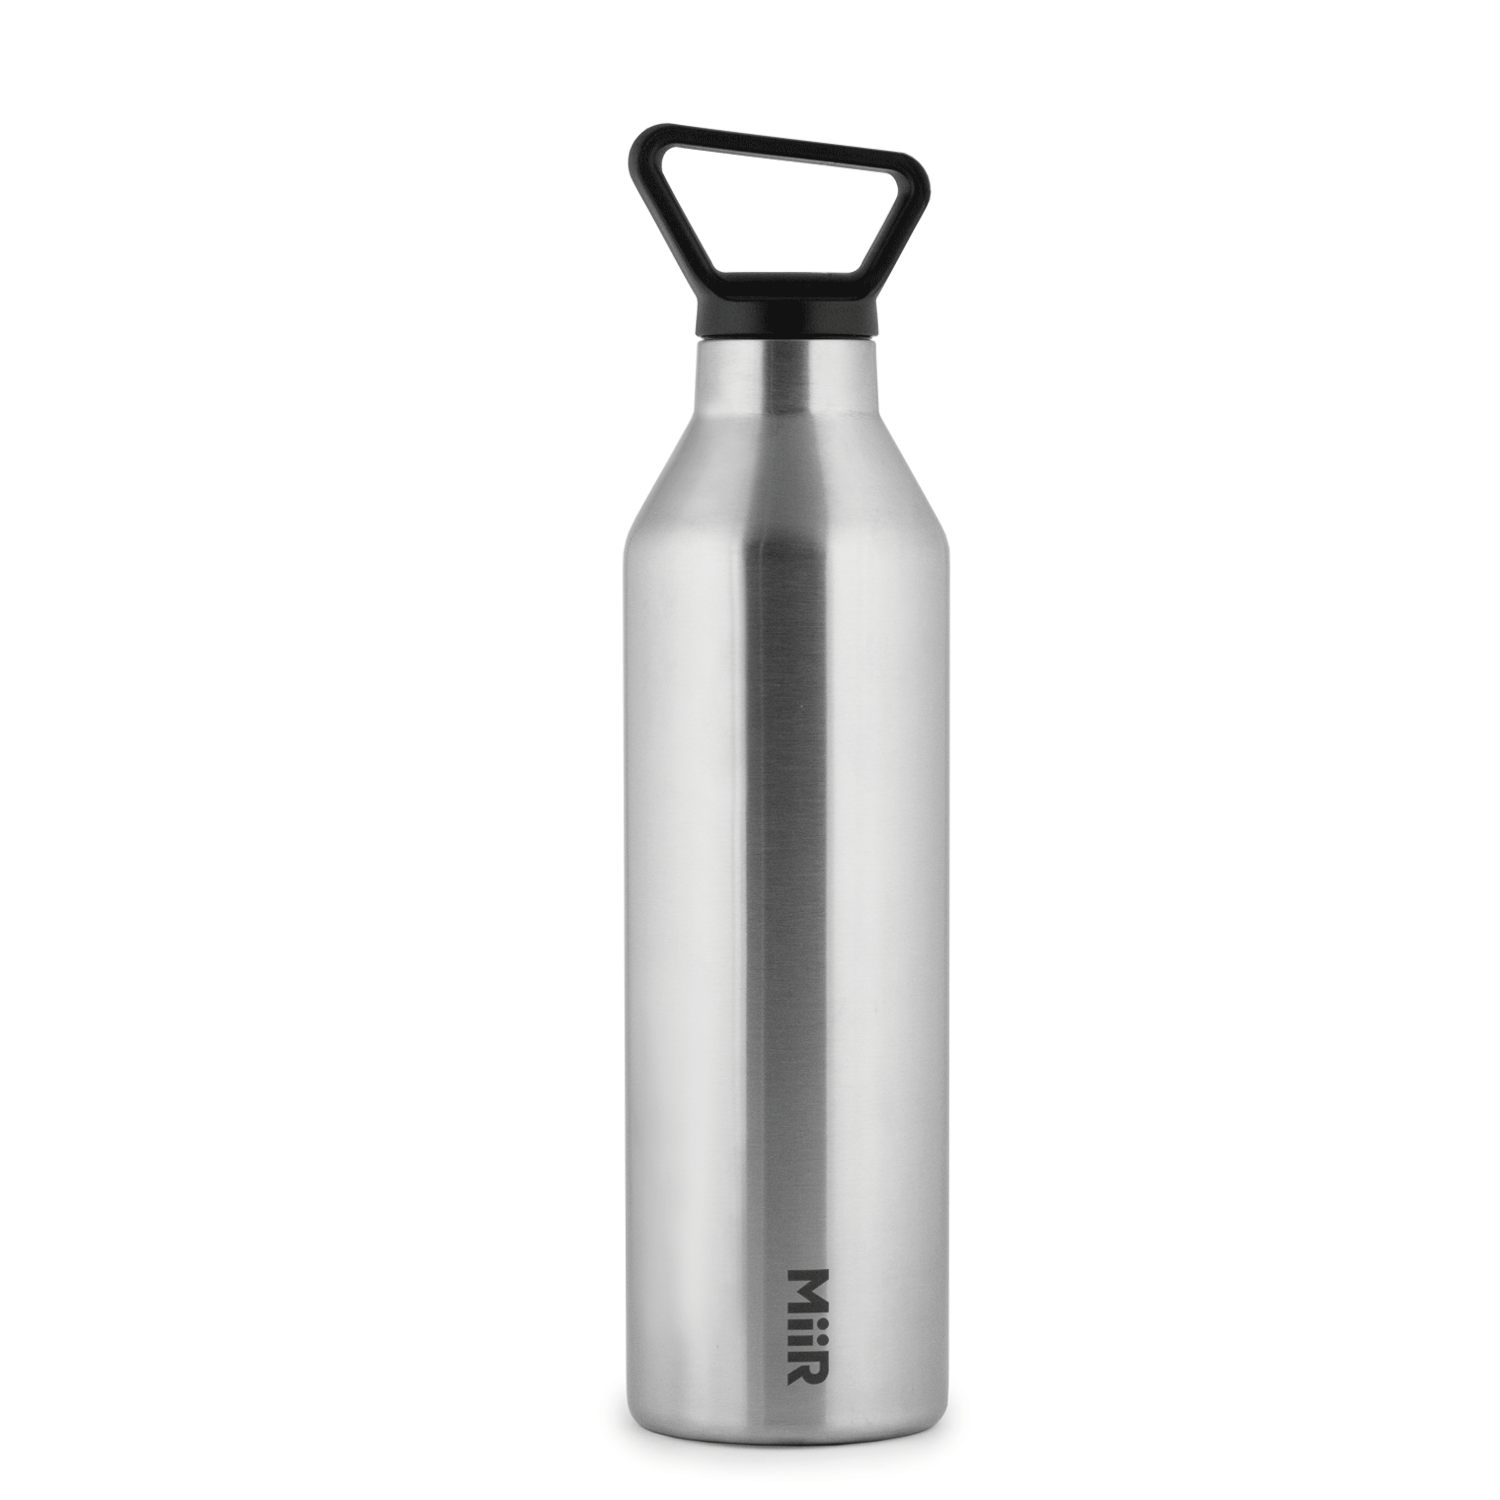 23 oz. Insulated Canister